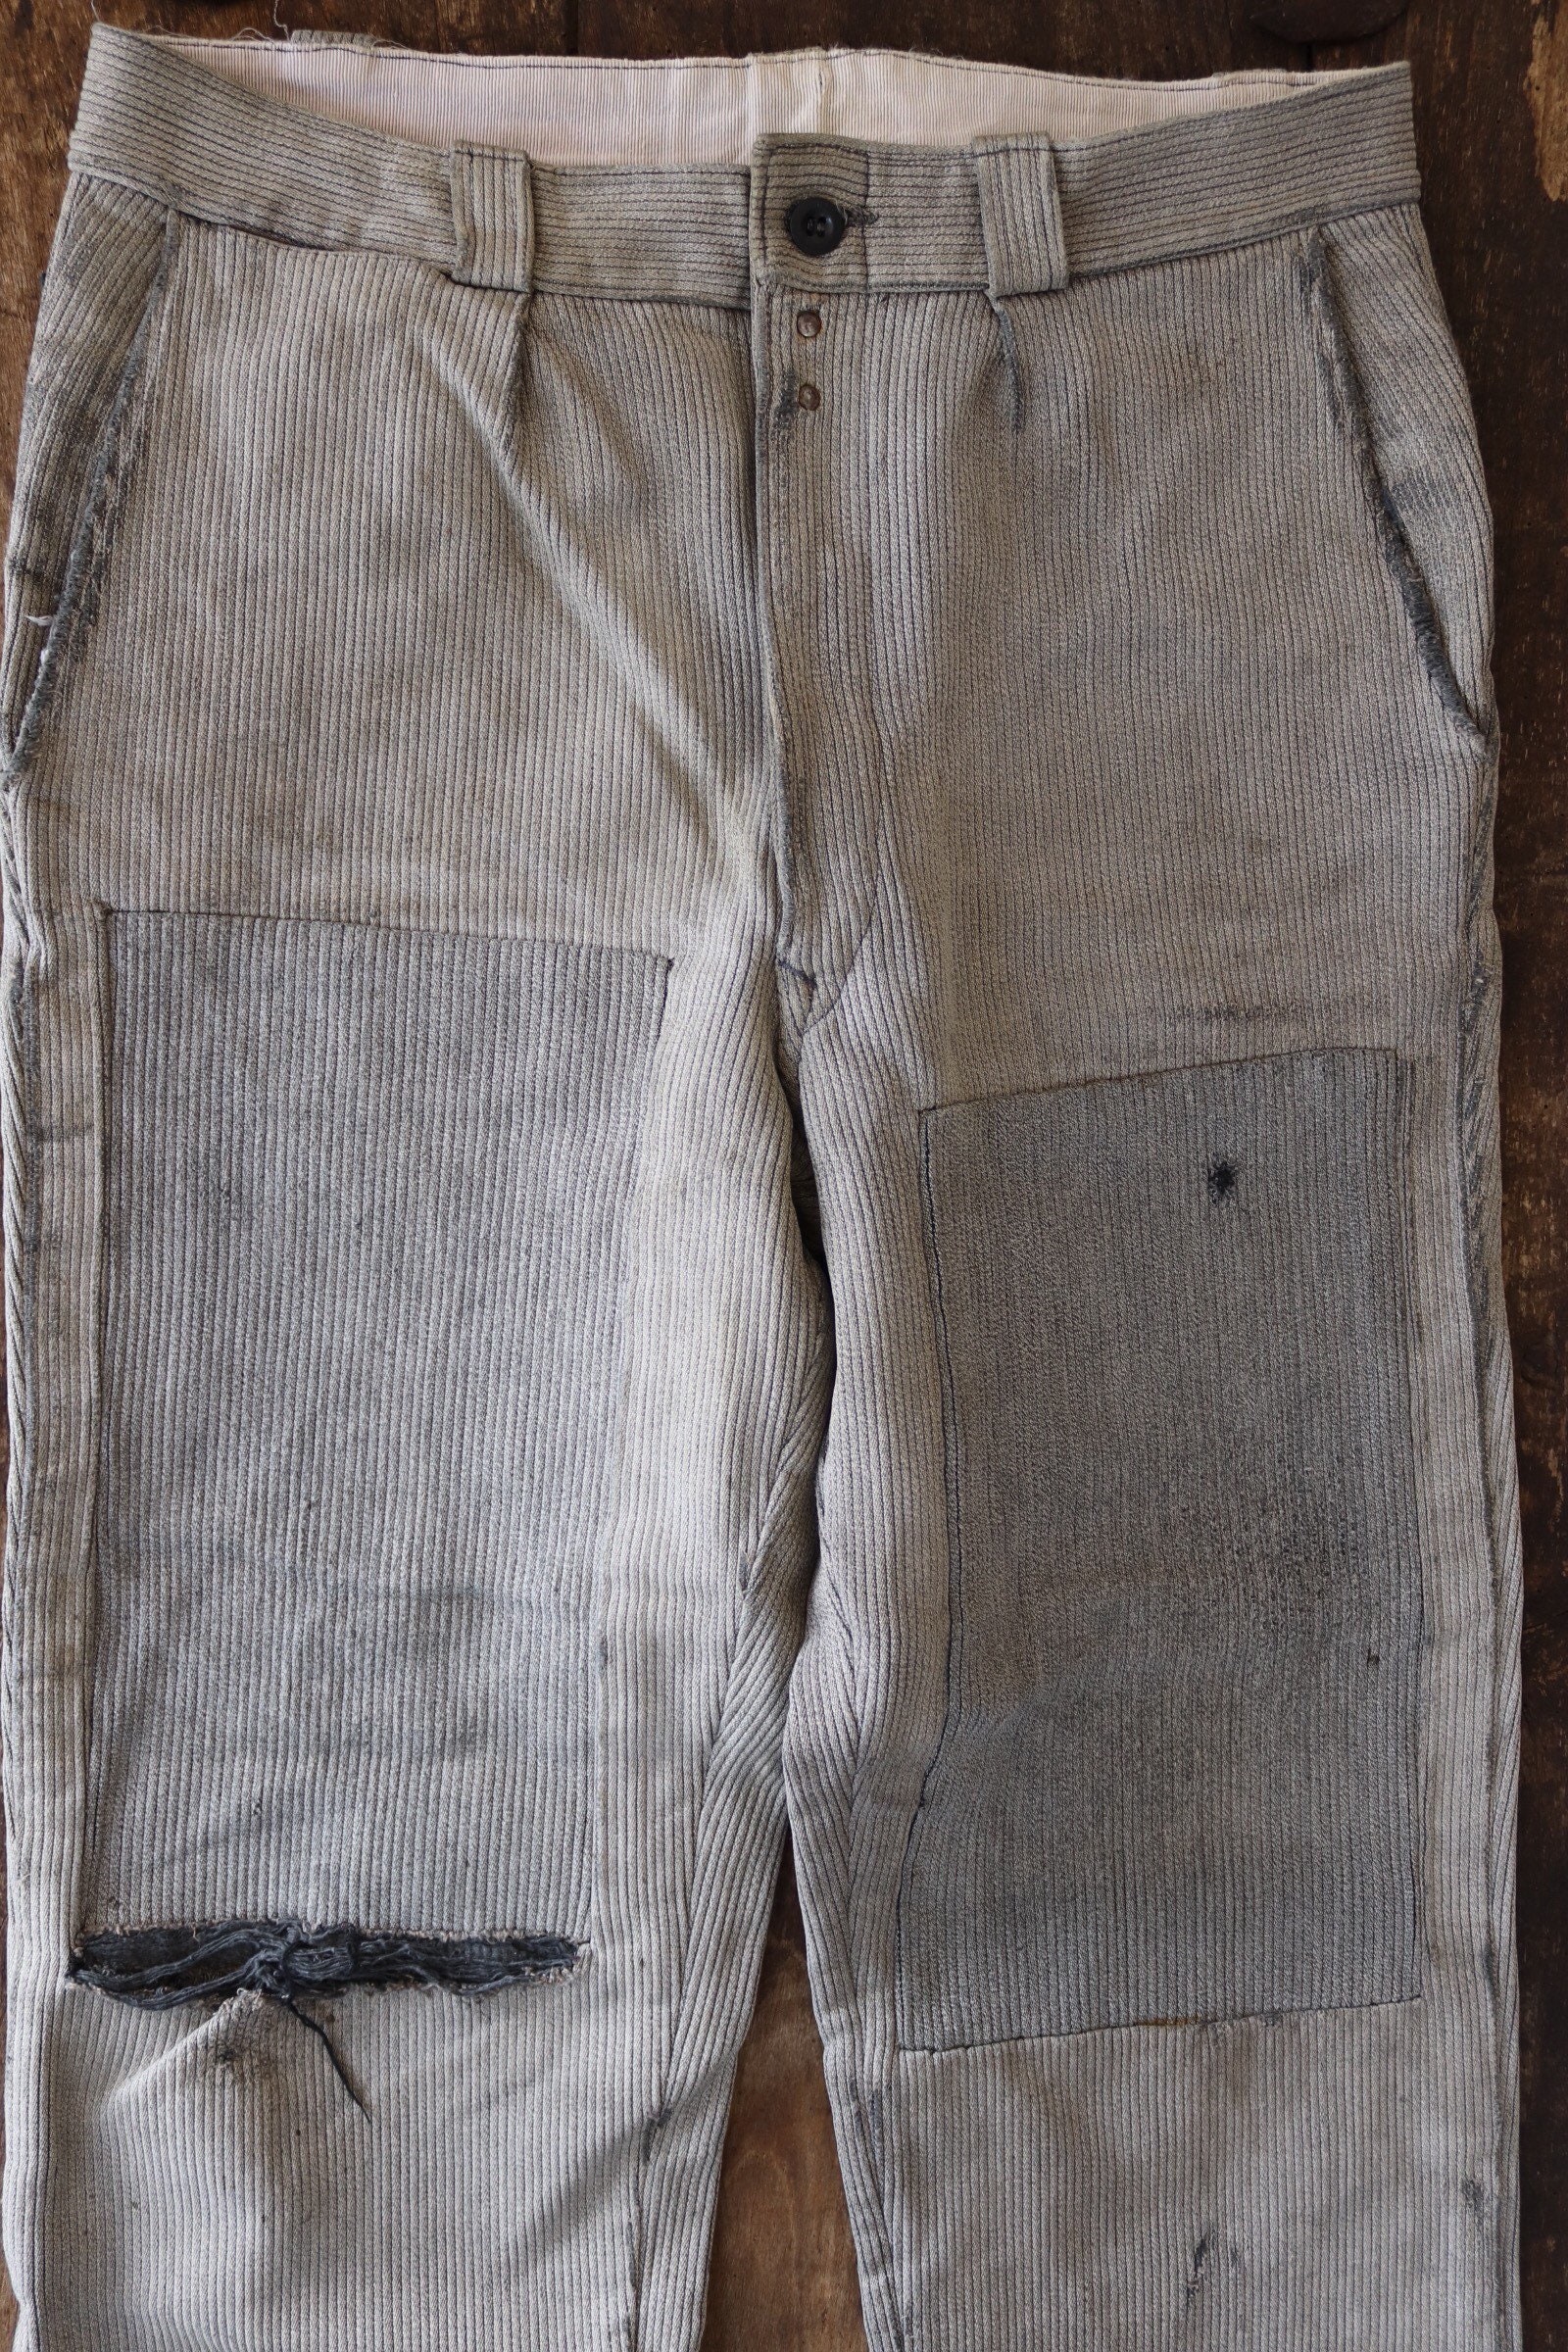 Vintage 1940s 40s french grey pique corduroy cotton work chore hunting ...